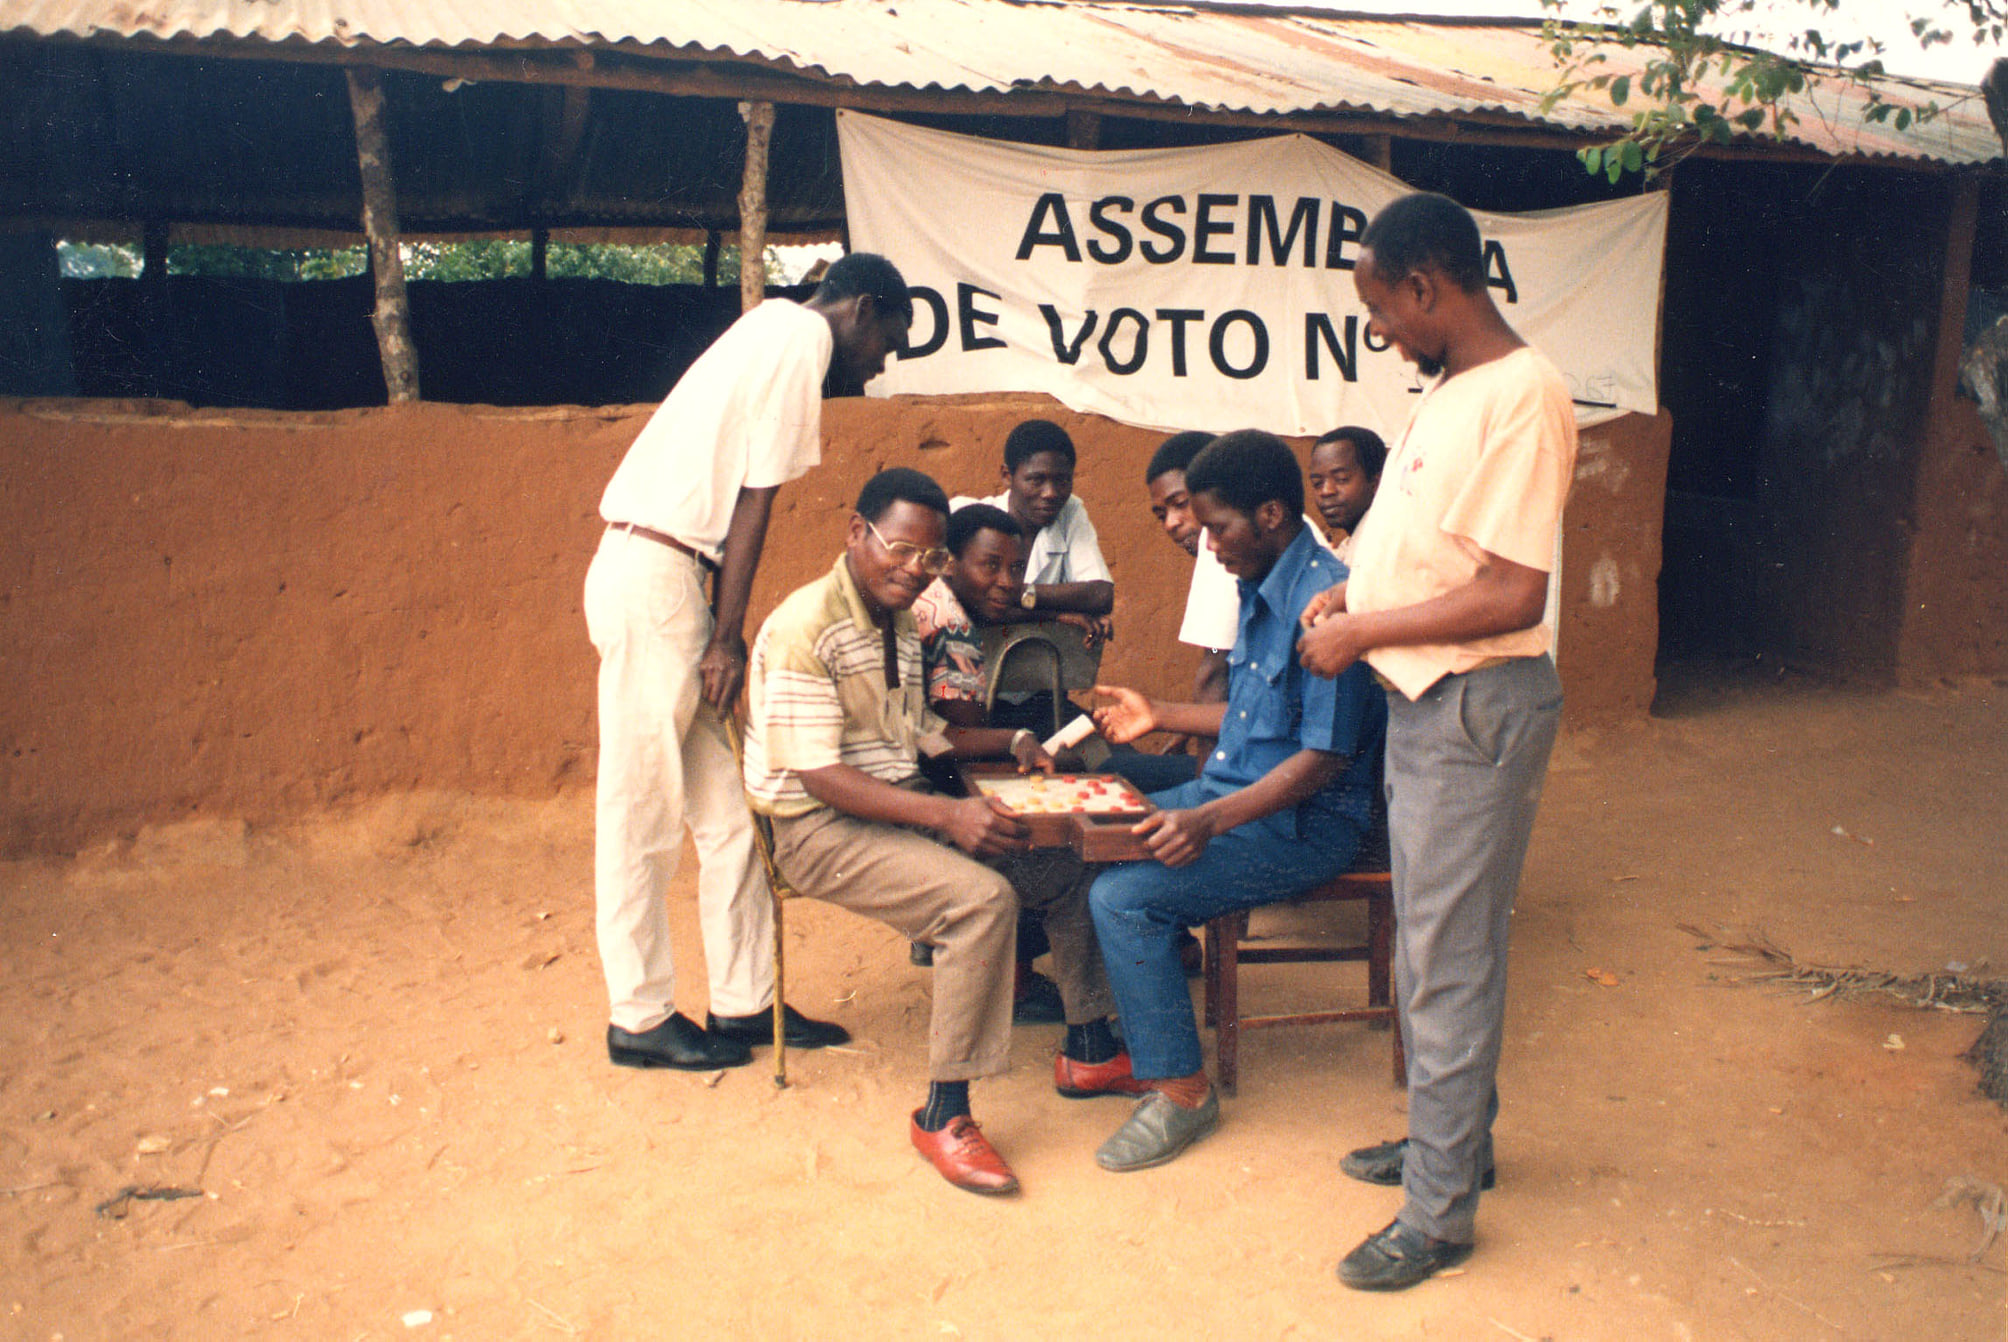 MOZAMBIQUE AND THE COMMUNITY OF SANT'EGIDIO, 30 YEARS AFTER AFTER THE PEACE AGREEMENTS